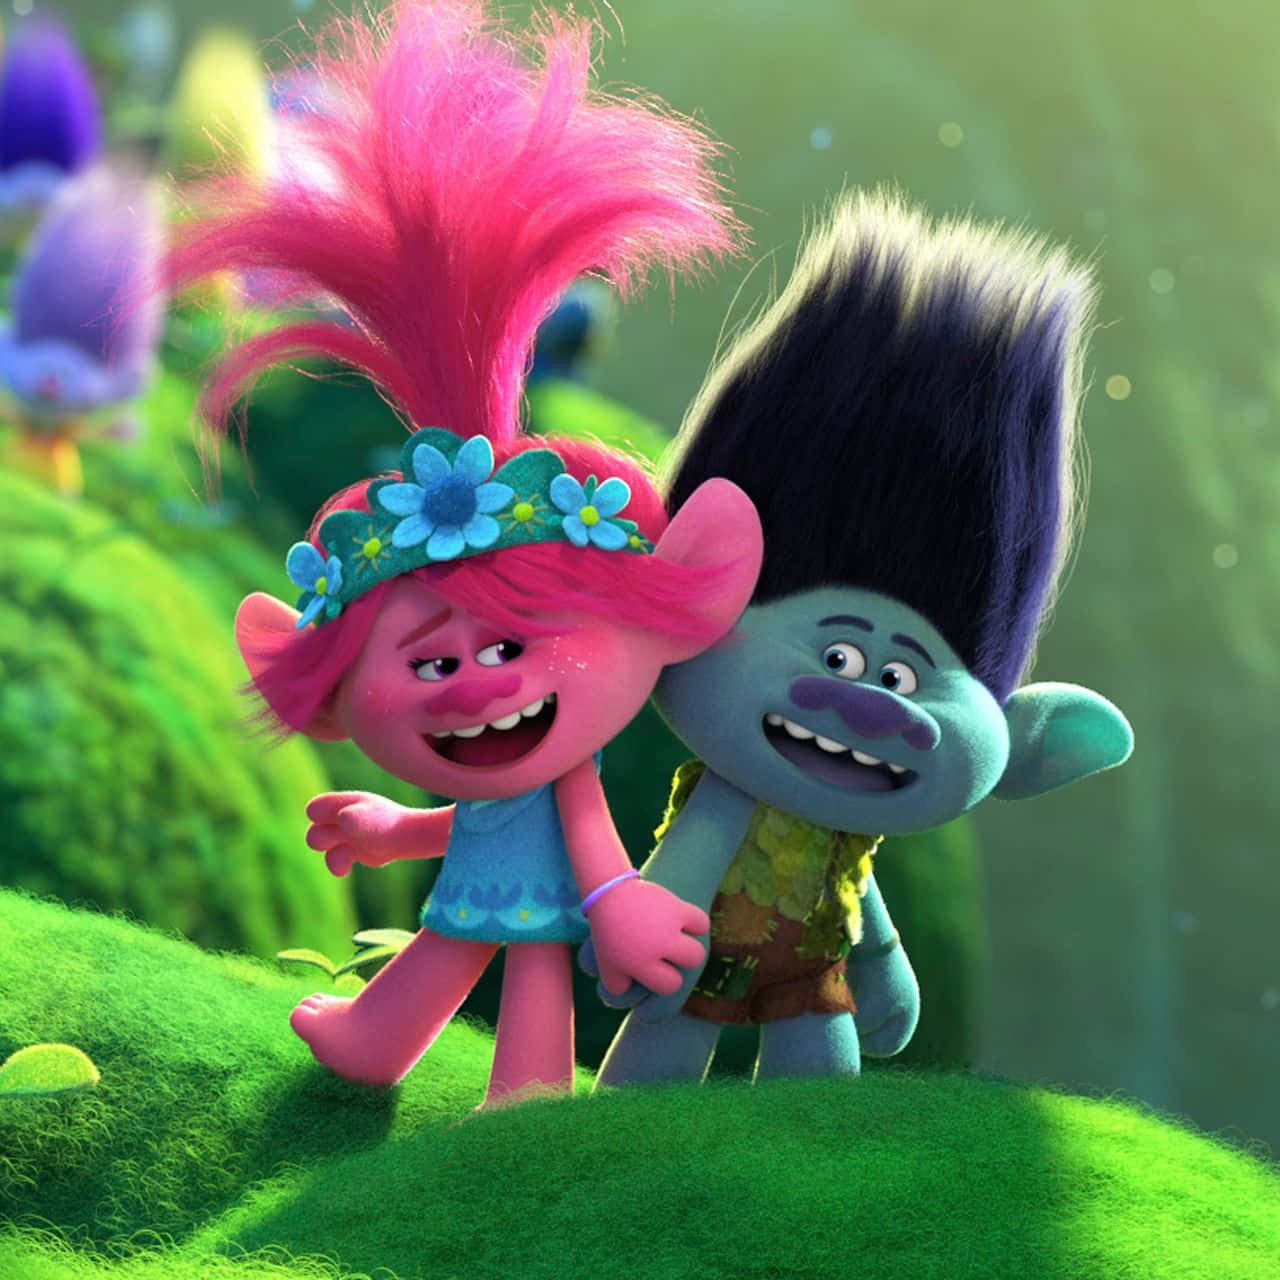 Experience the Fun and Colorful Adventure with DreamWorks's 'Trolls'